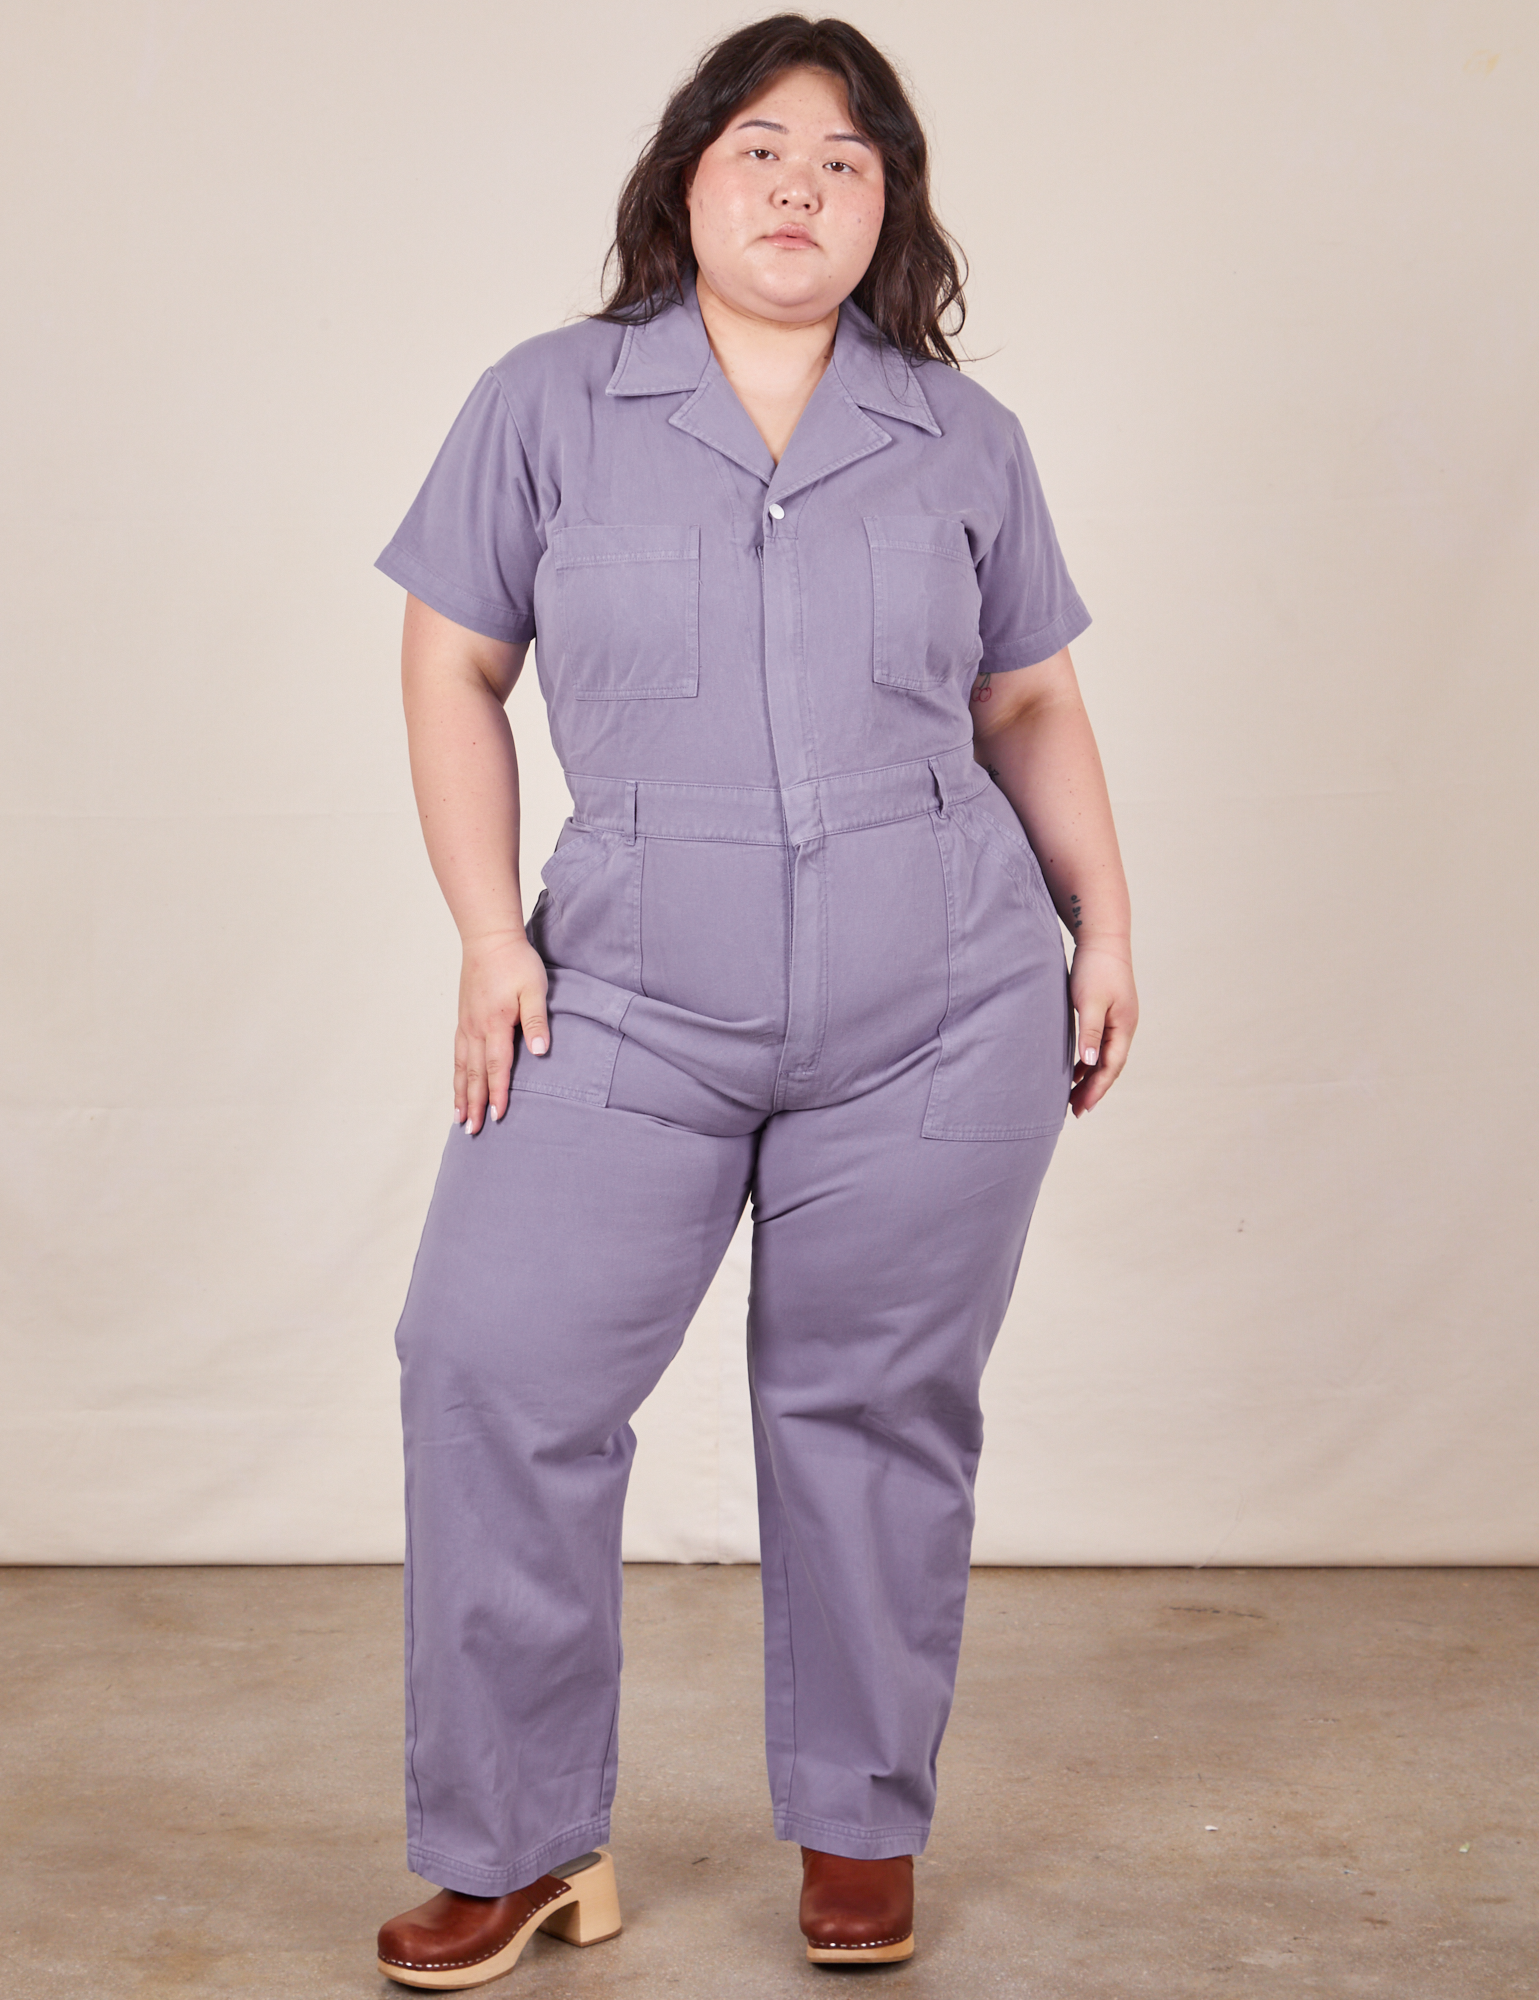 Ashley is 5&#39;7&quot; and wearing 1XL Short Sleeve Jumpsuit in Faded Grape